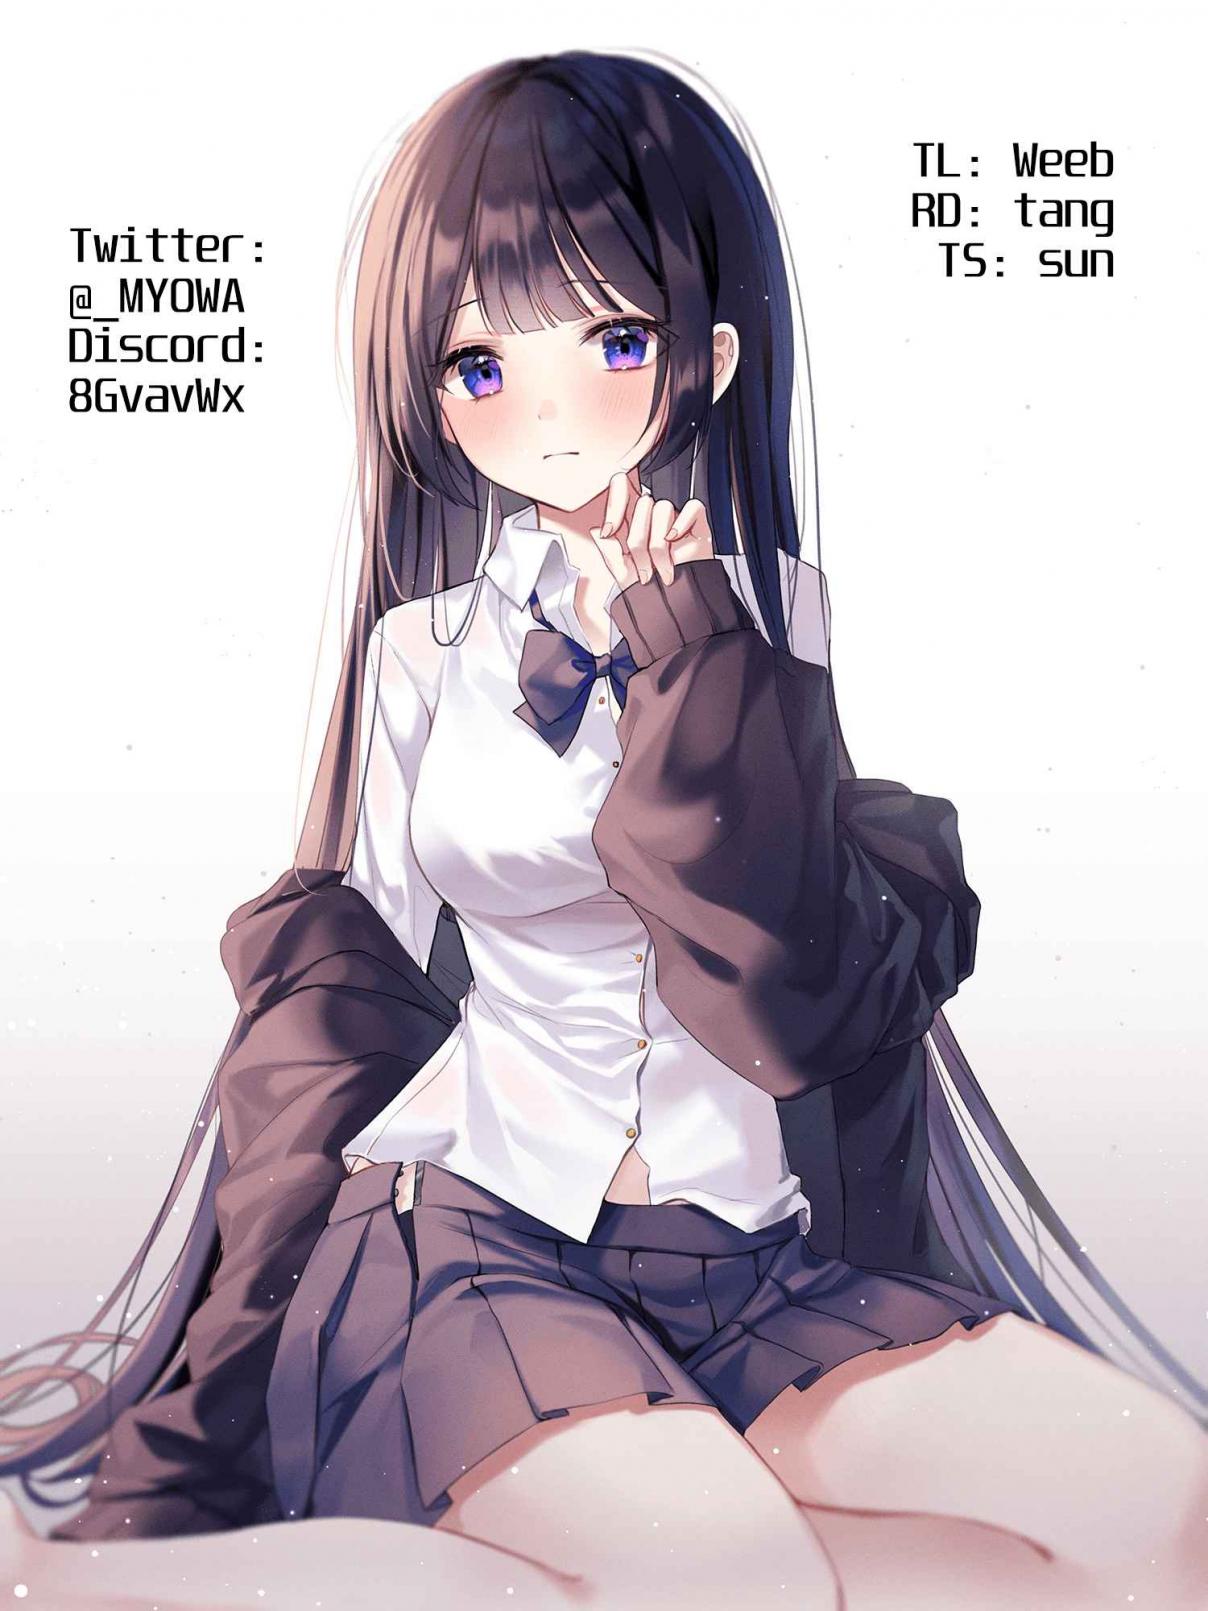 A Girl Who Can't Speak Thinks "She Is Too Kind." Vol. 2 Ch. 18 Mashiro and the Sea